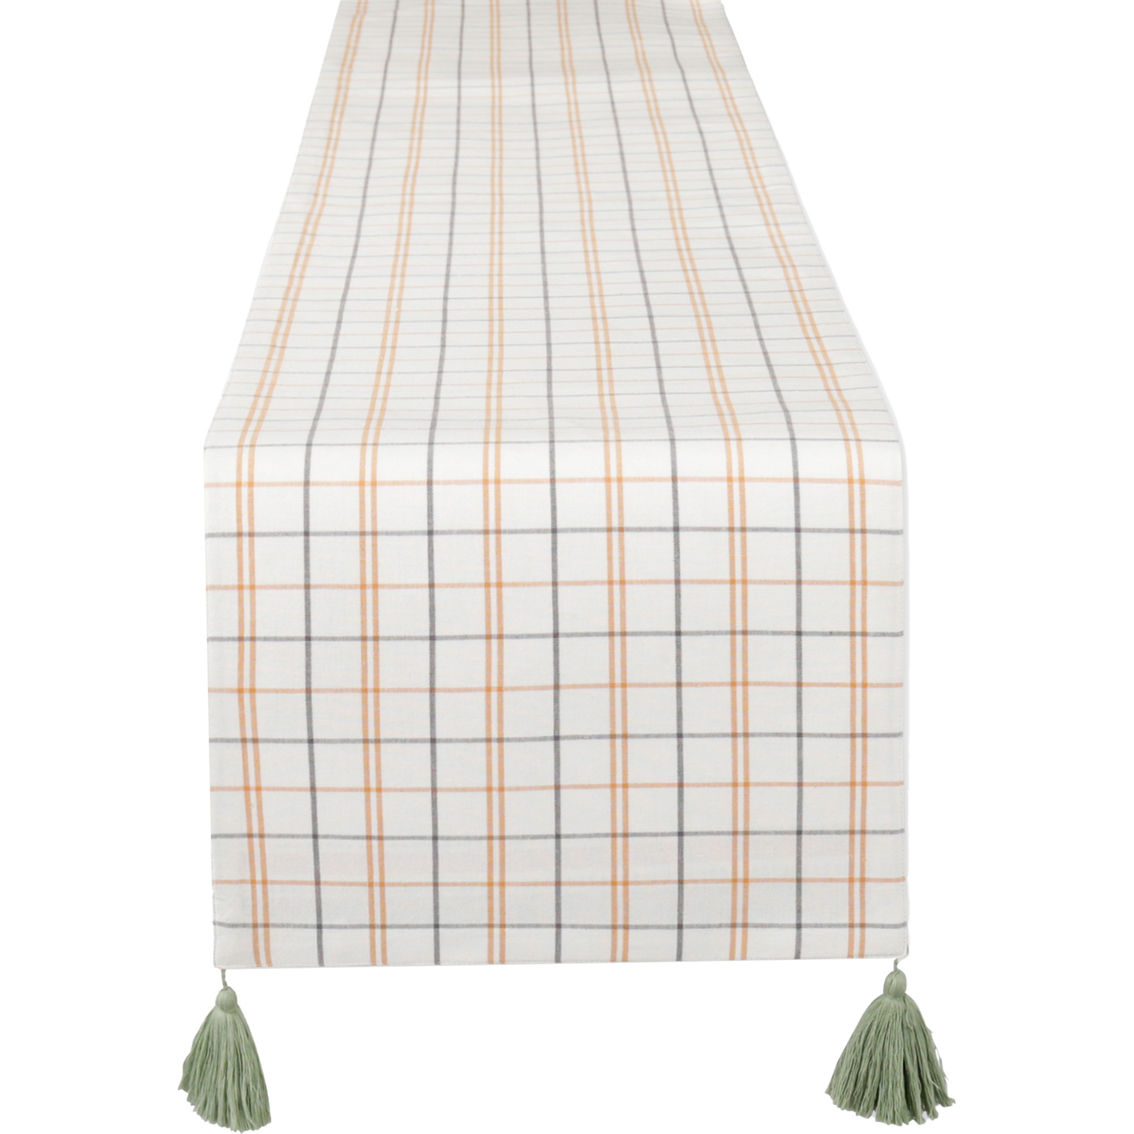 Design Imports 14 x 72 in. Gather Fall Squash Reversible Table Runner - Image 4 of 10